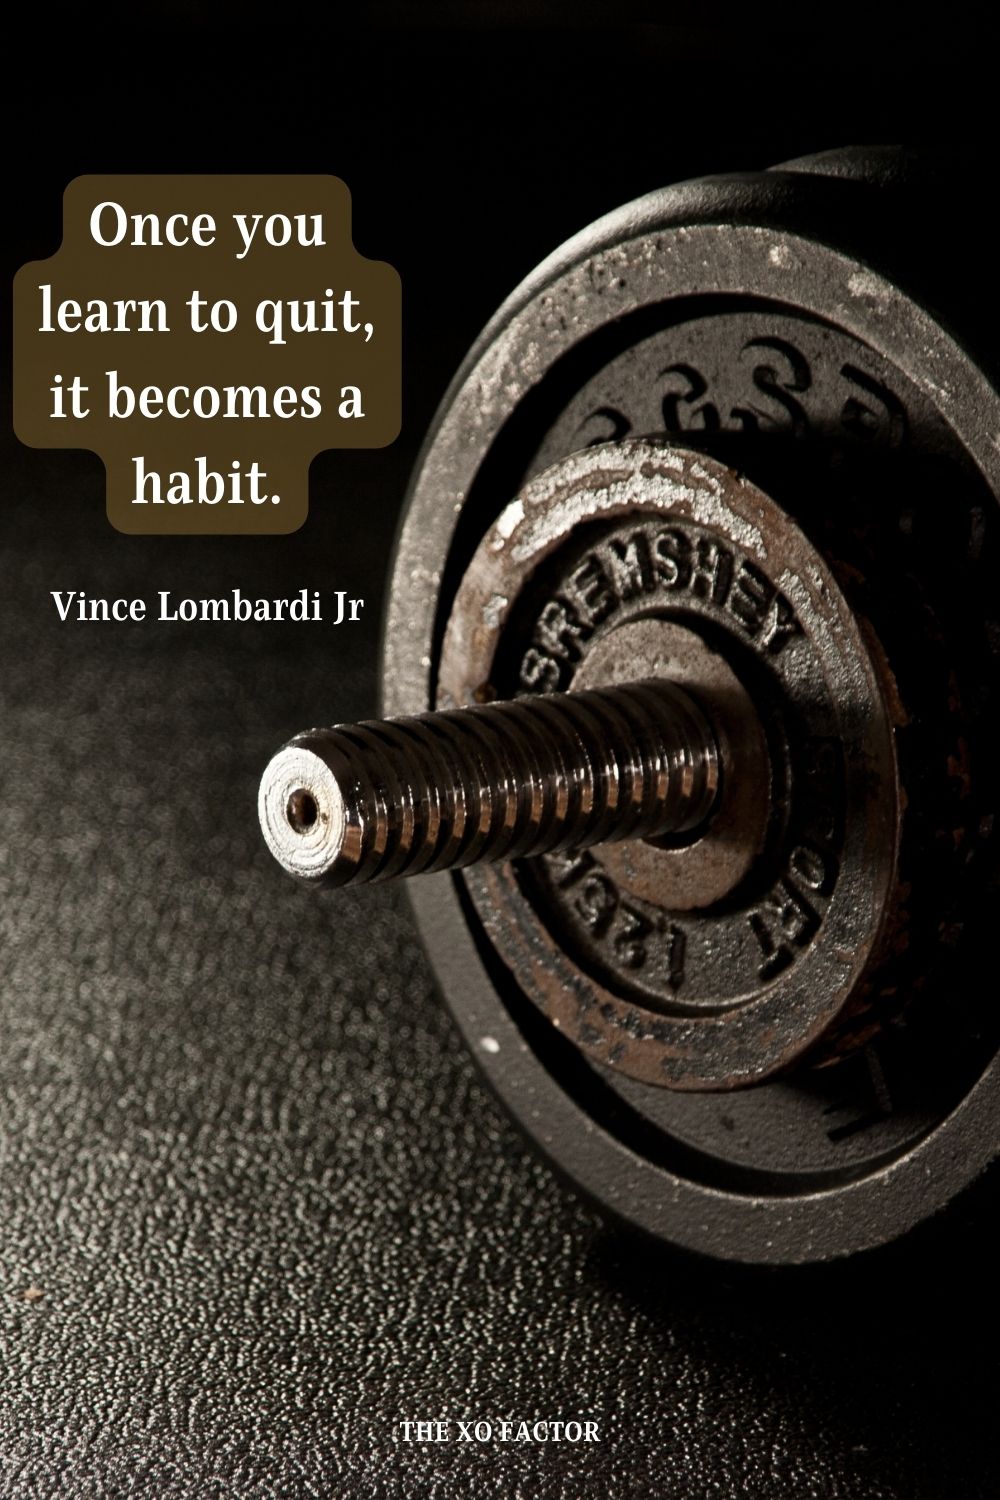 Once you learn to quit, it becomes a habit. Vince Lombardi Jr